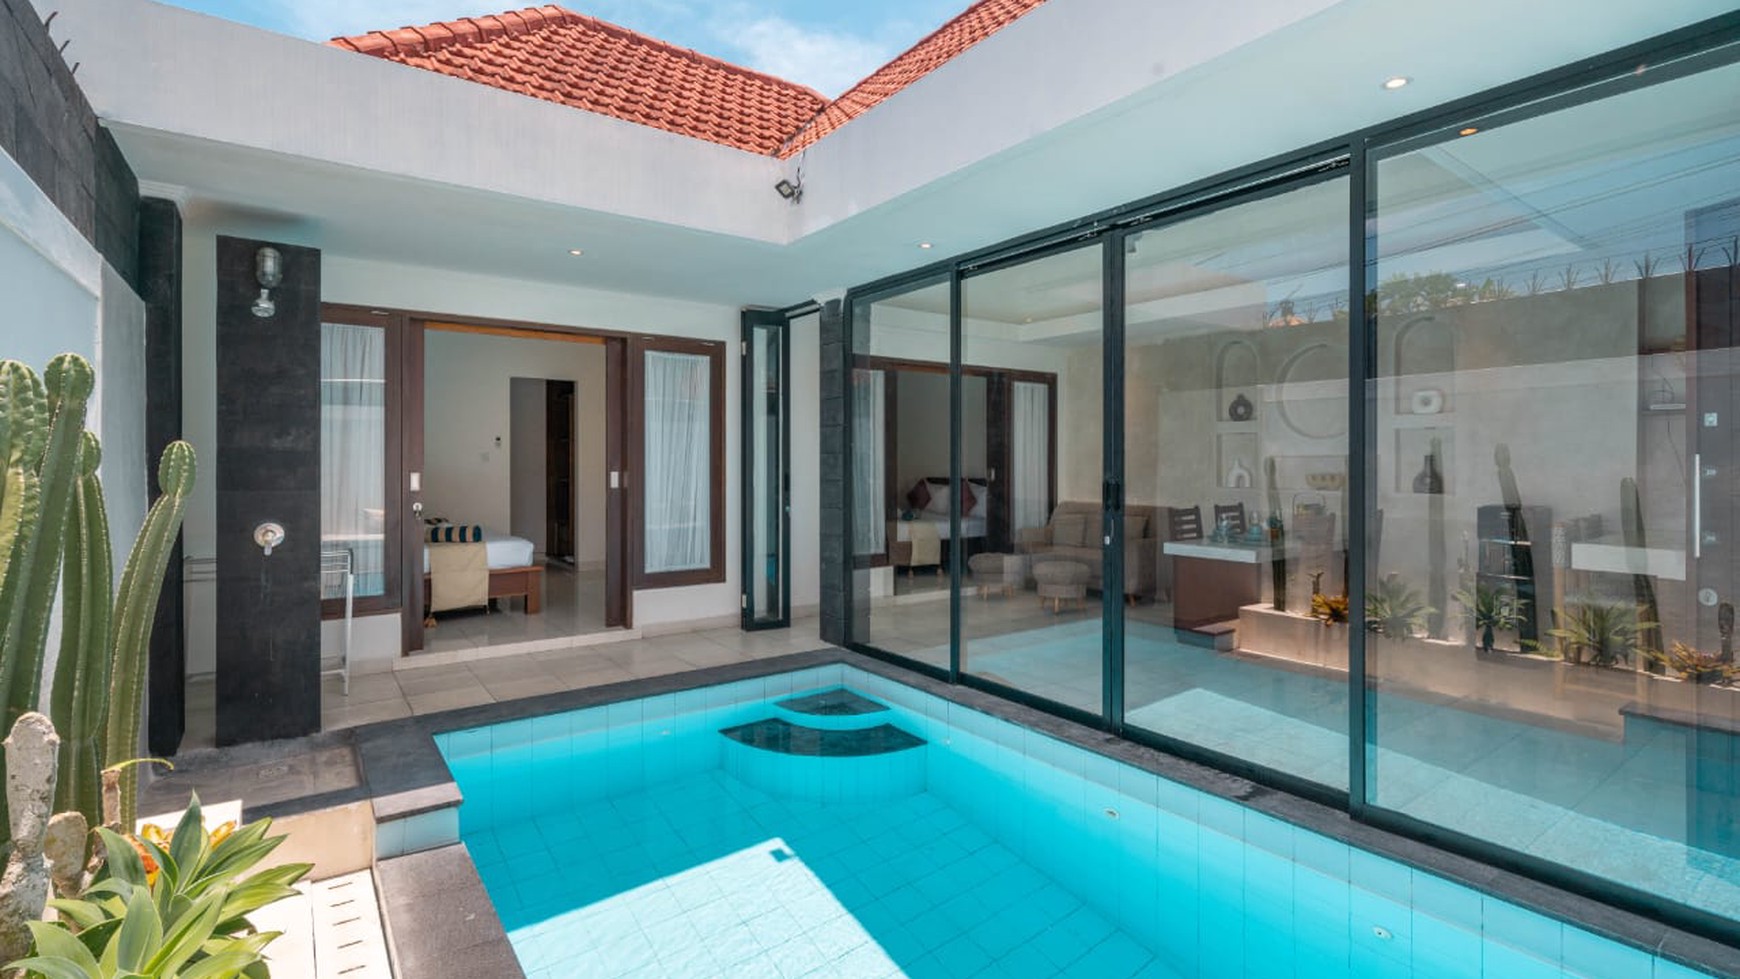 2 bedroom for longterm or yearly rental in great location Berawa, Canggu